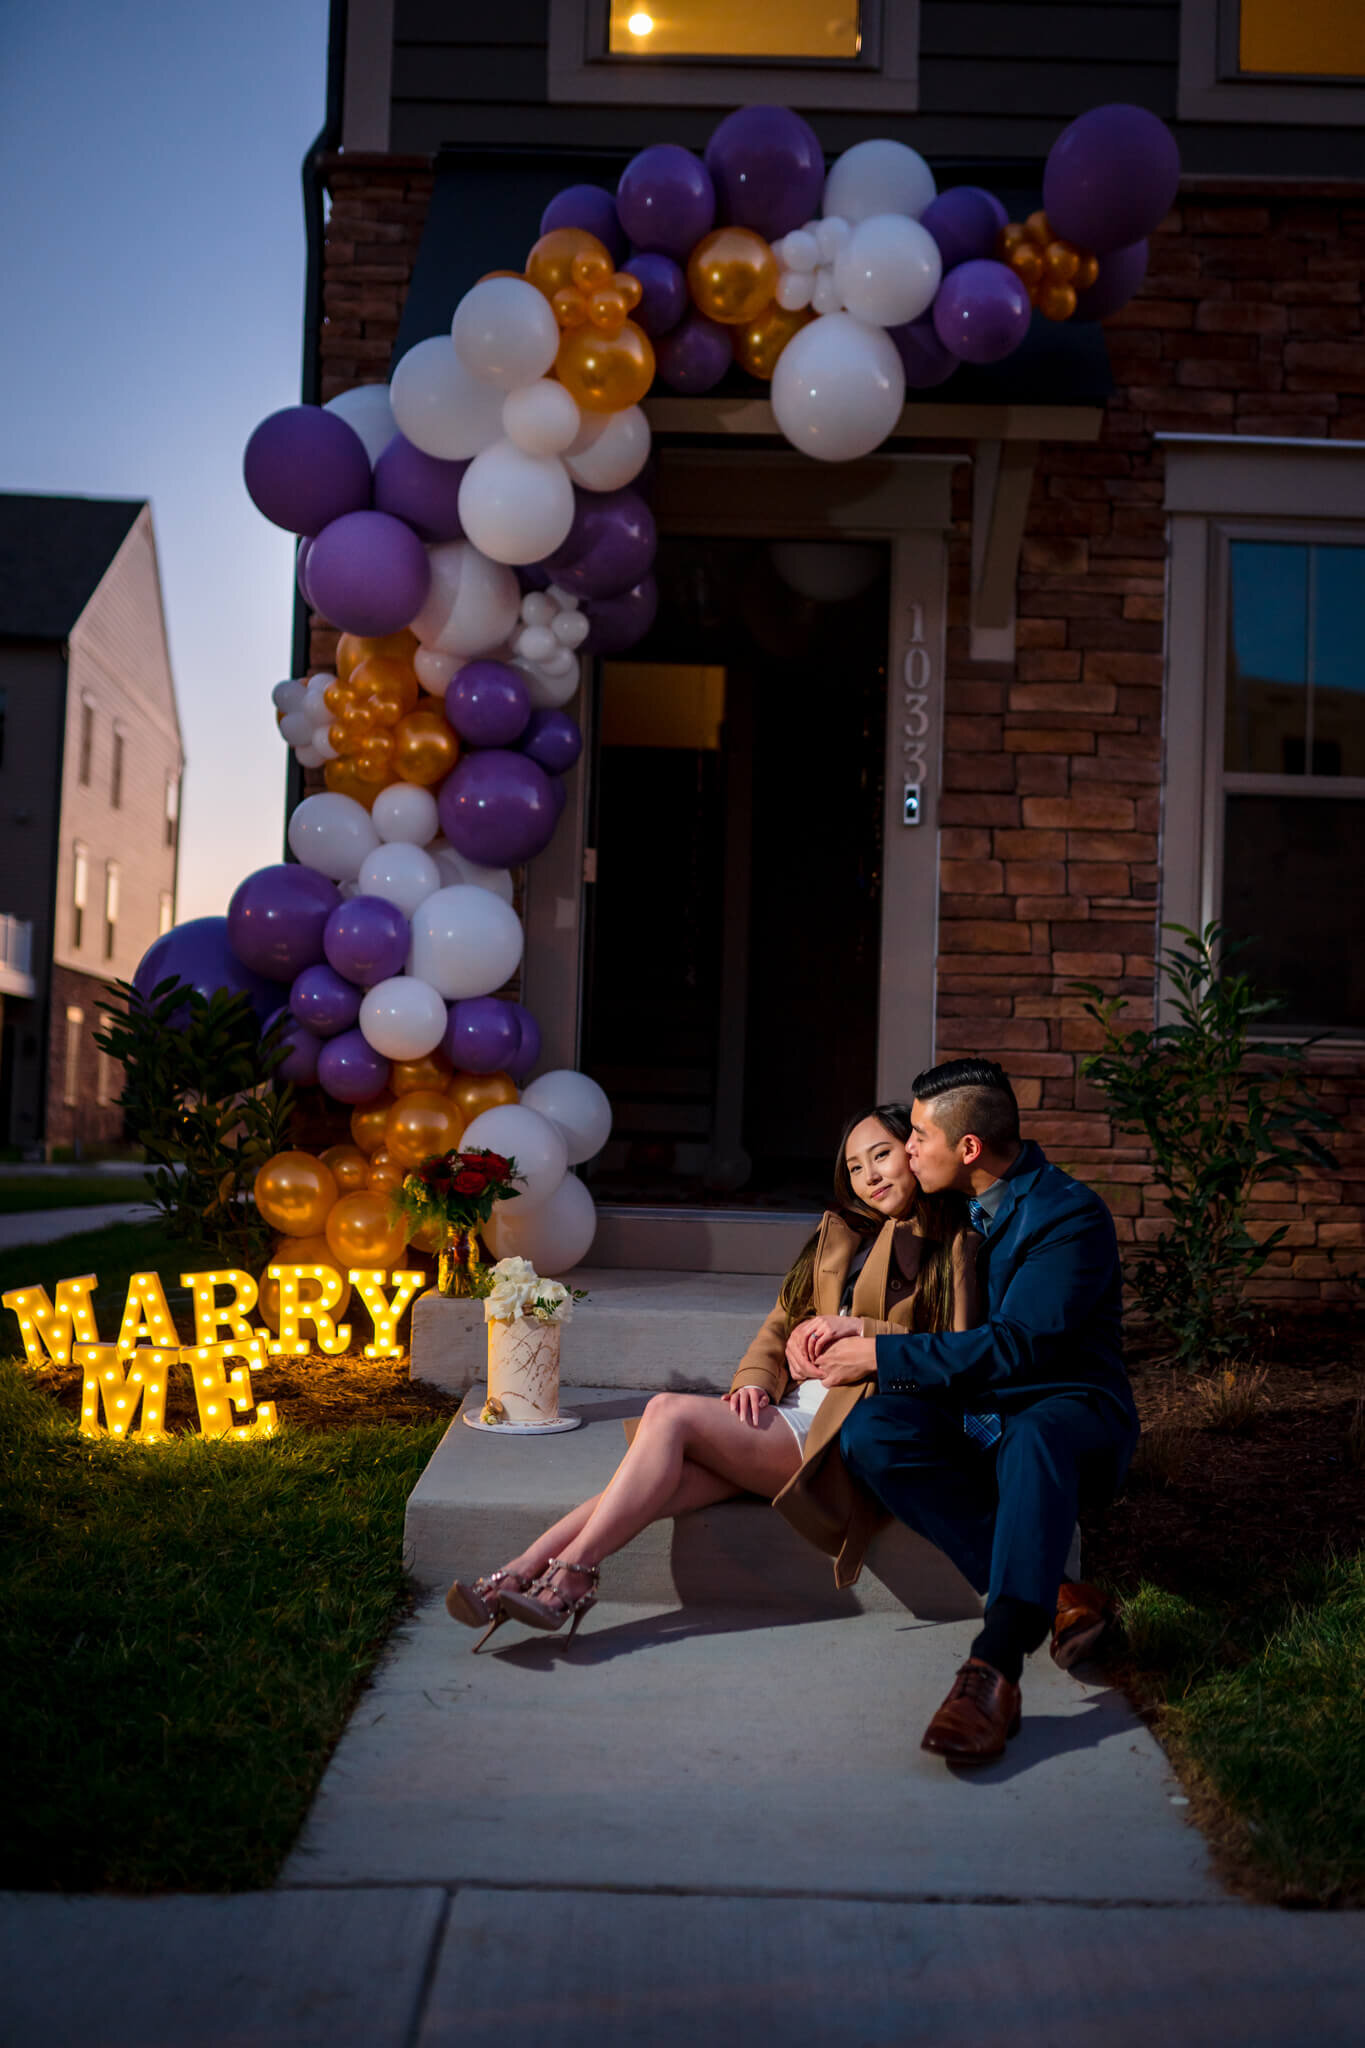 Lyla-Kingston-Surprise-Proposal-New-Home-Stanley-Martin-Homes-Leesburg-VA-Photography-by-Bee-Two-Sweet-212.jpg